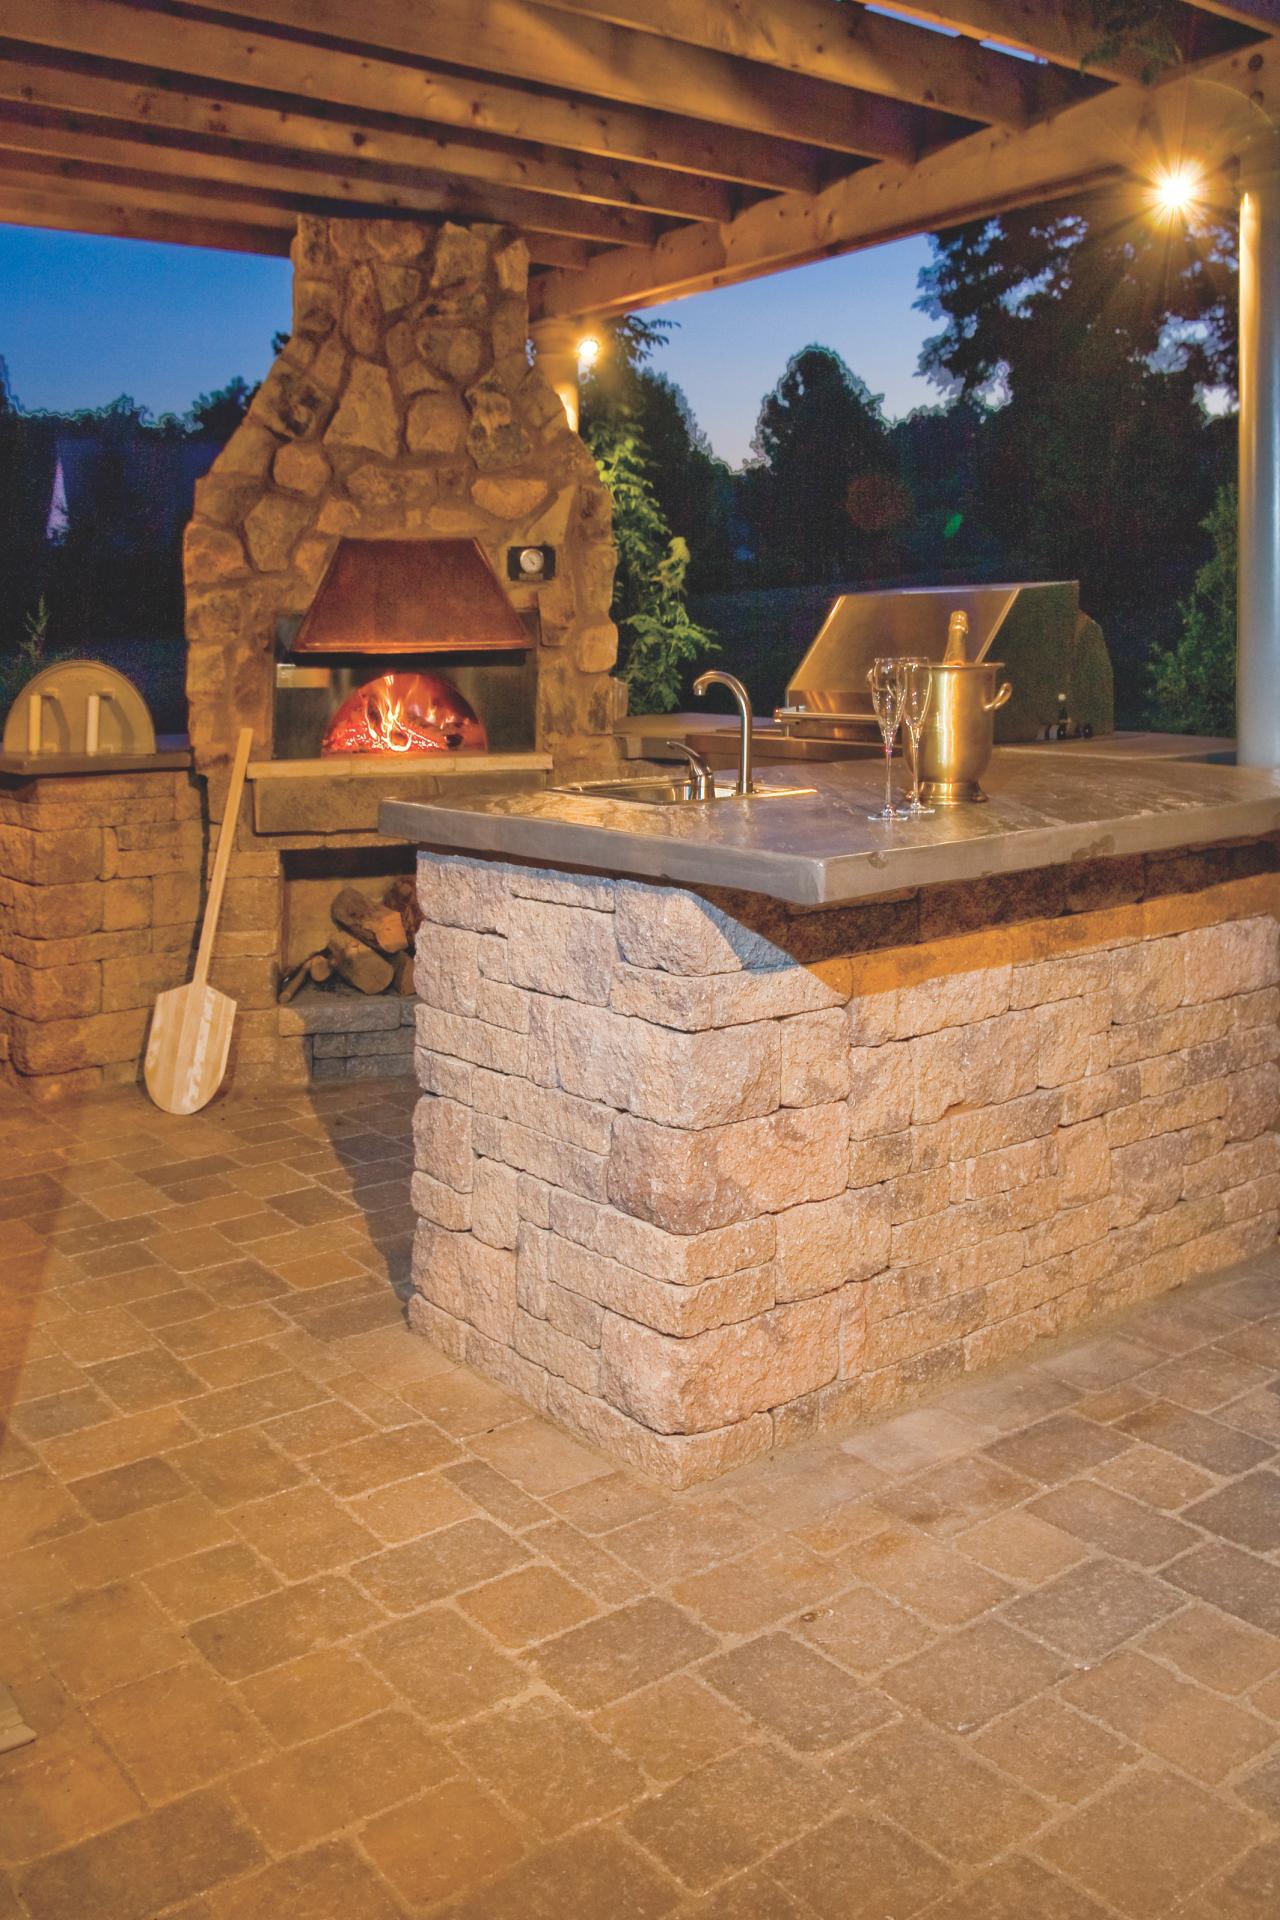 Outdoor Pizza Oven Fireplace Options, Outdoor Fireplace Pizza Oven Ideas